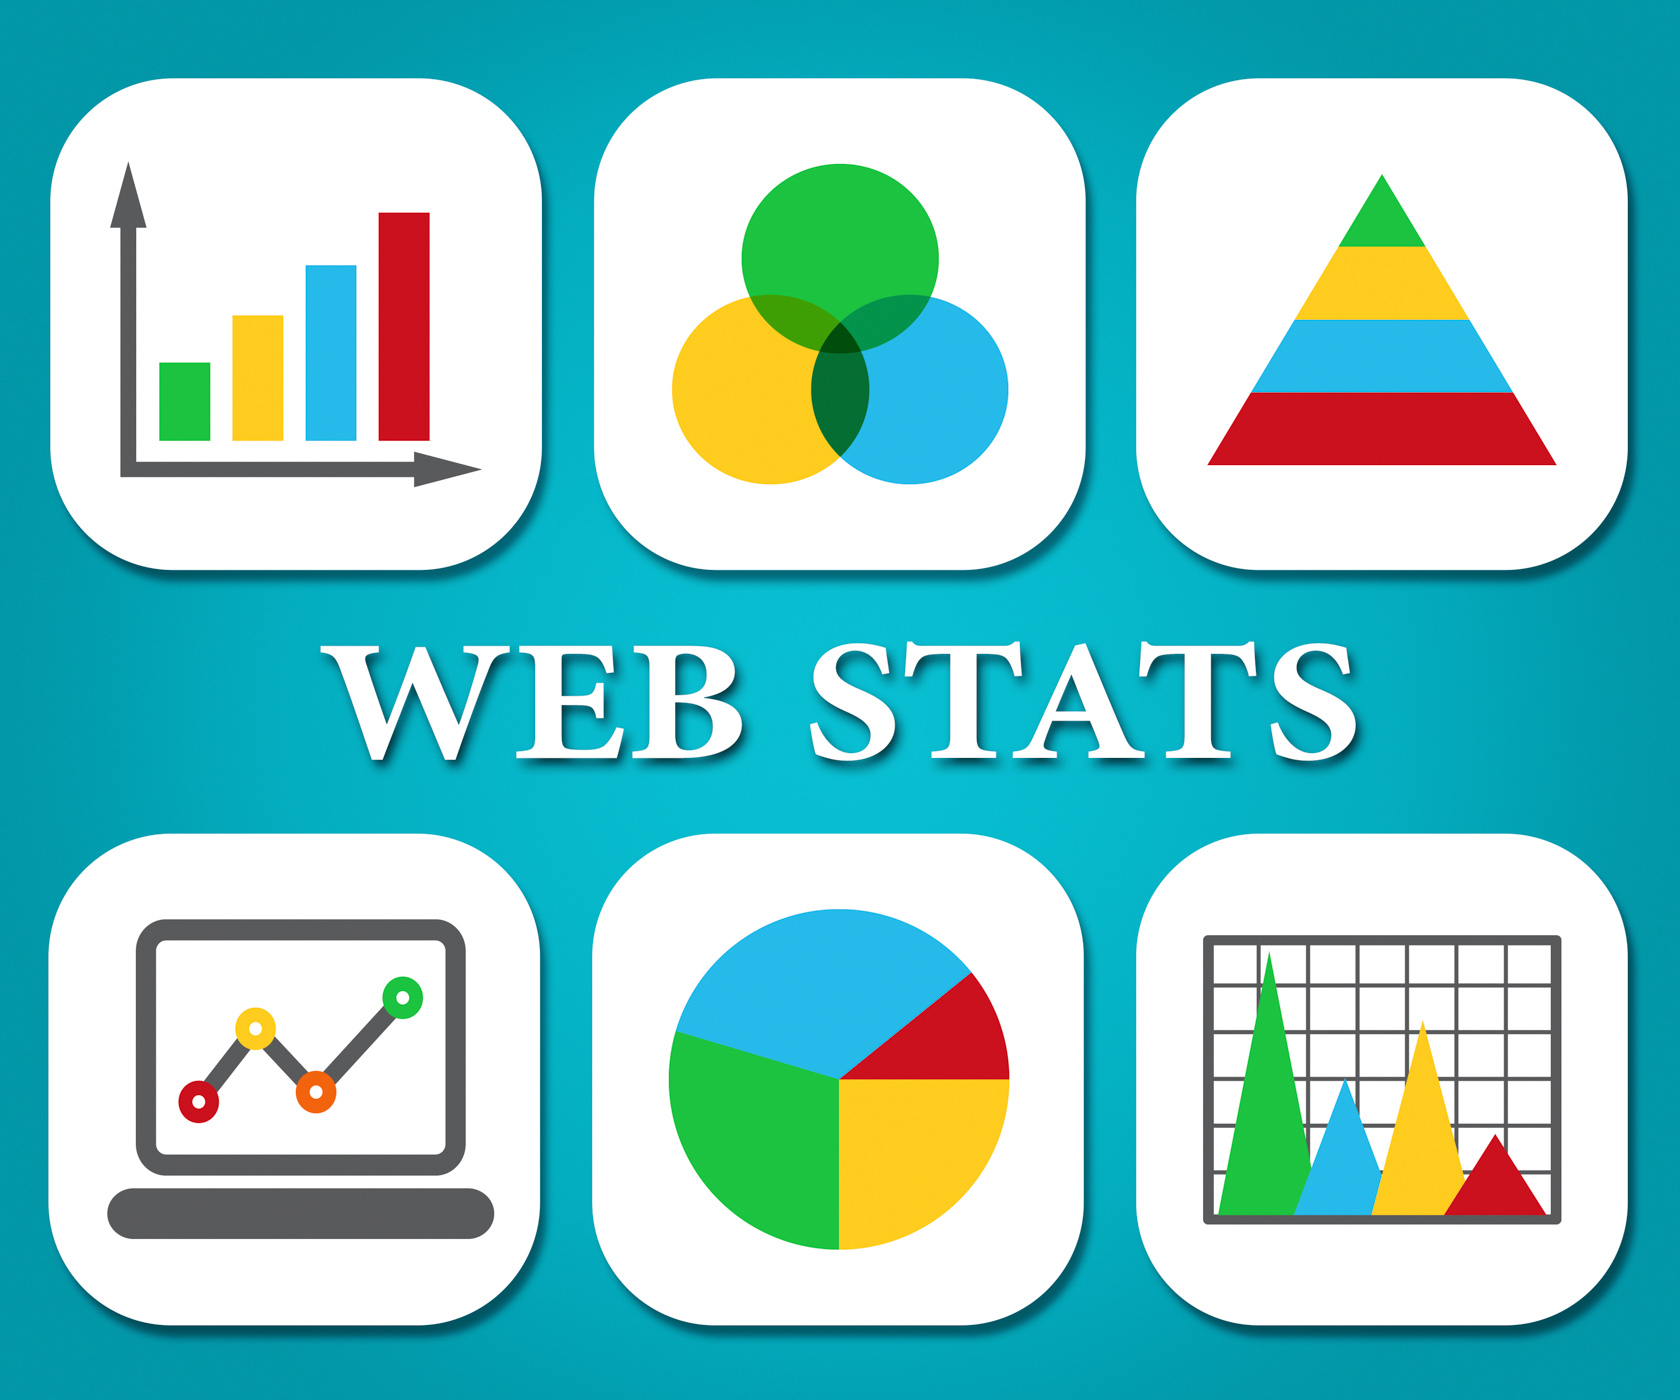 Web stats indicates business graph and analysing photo